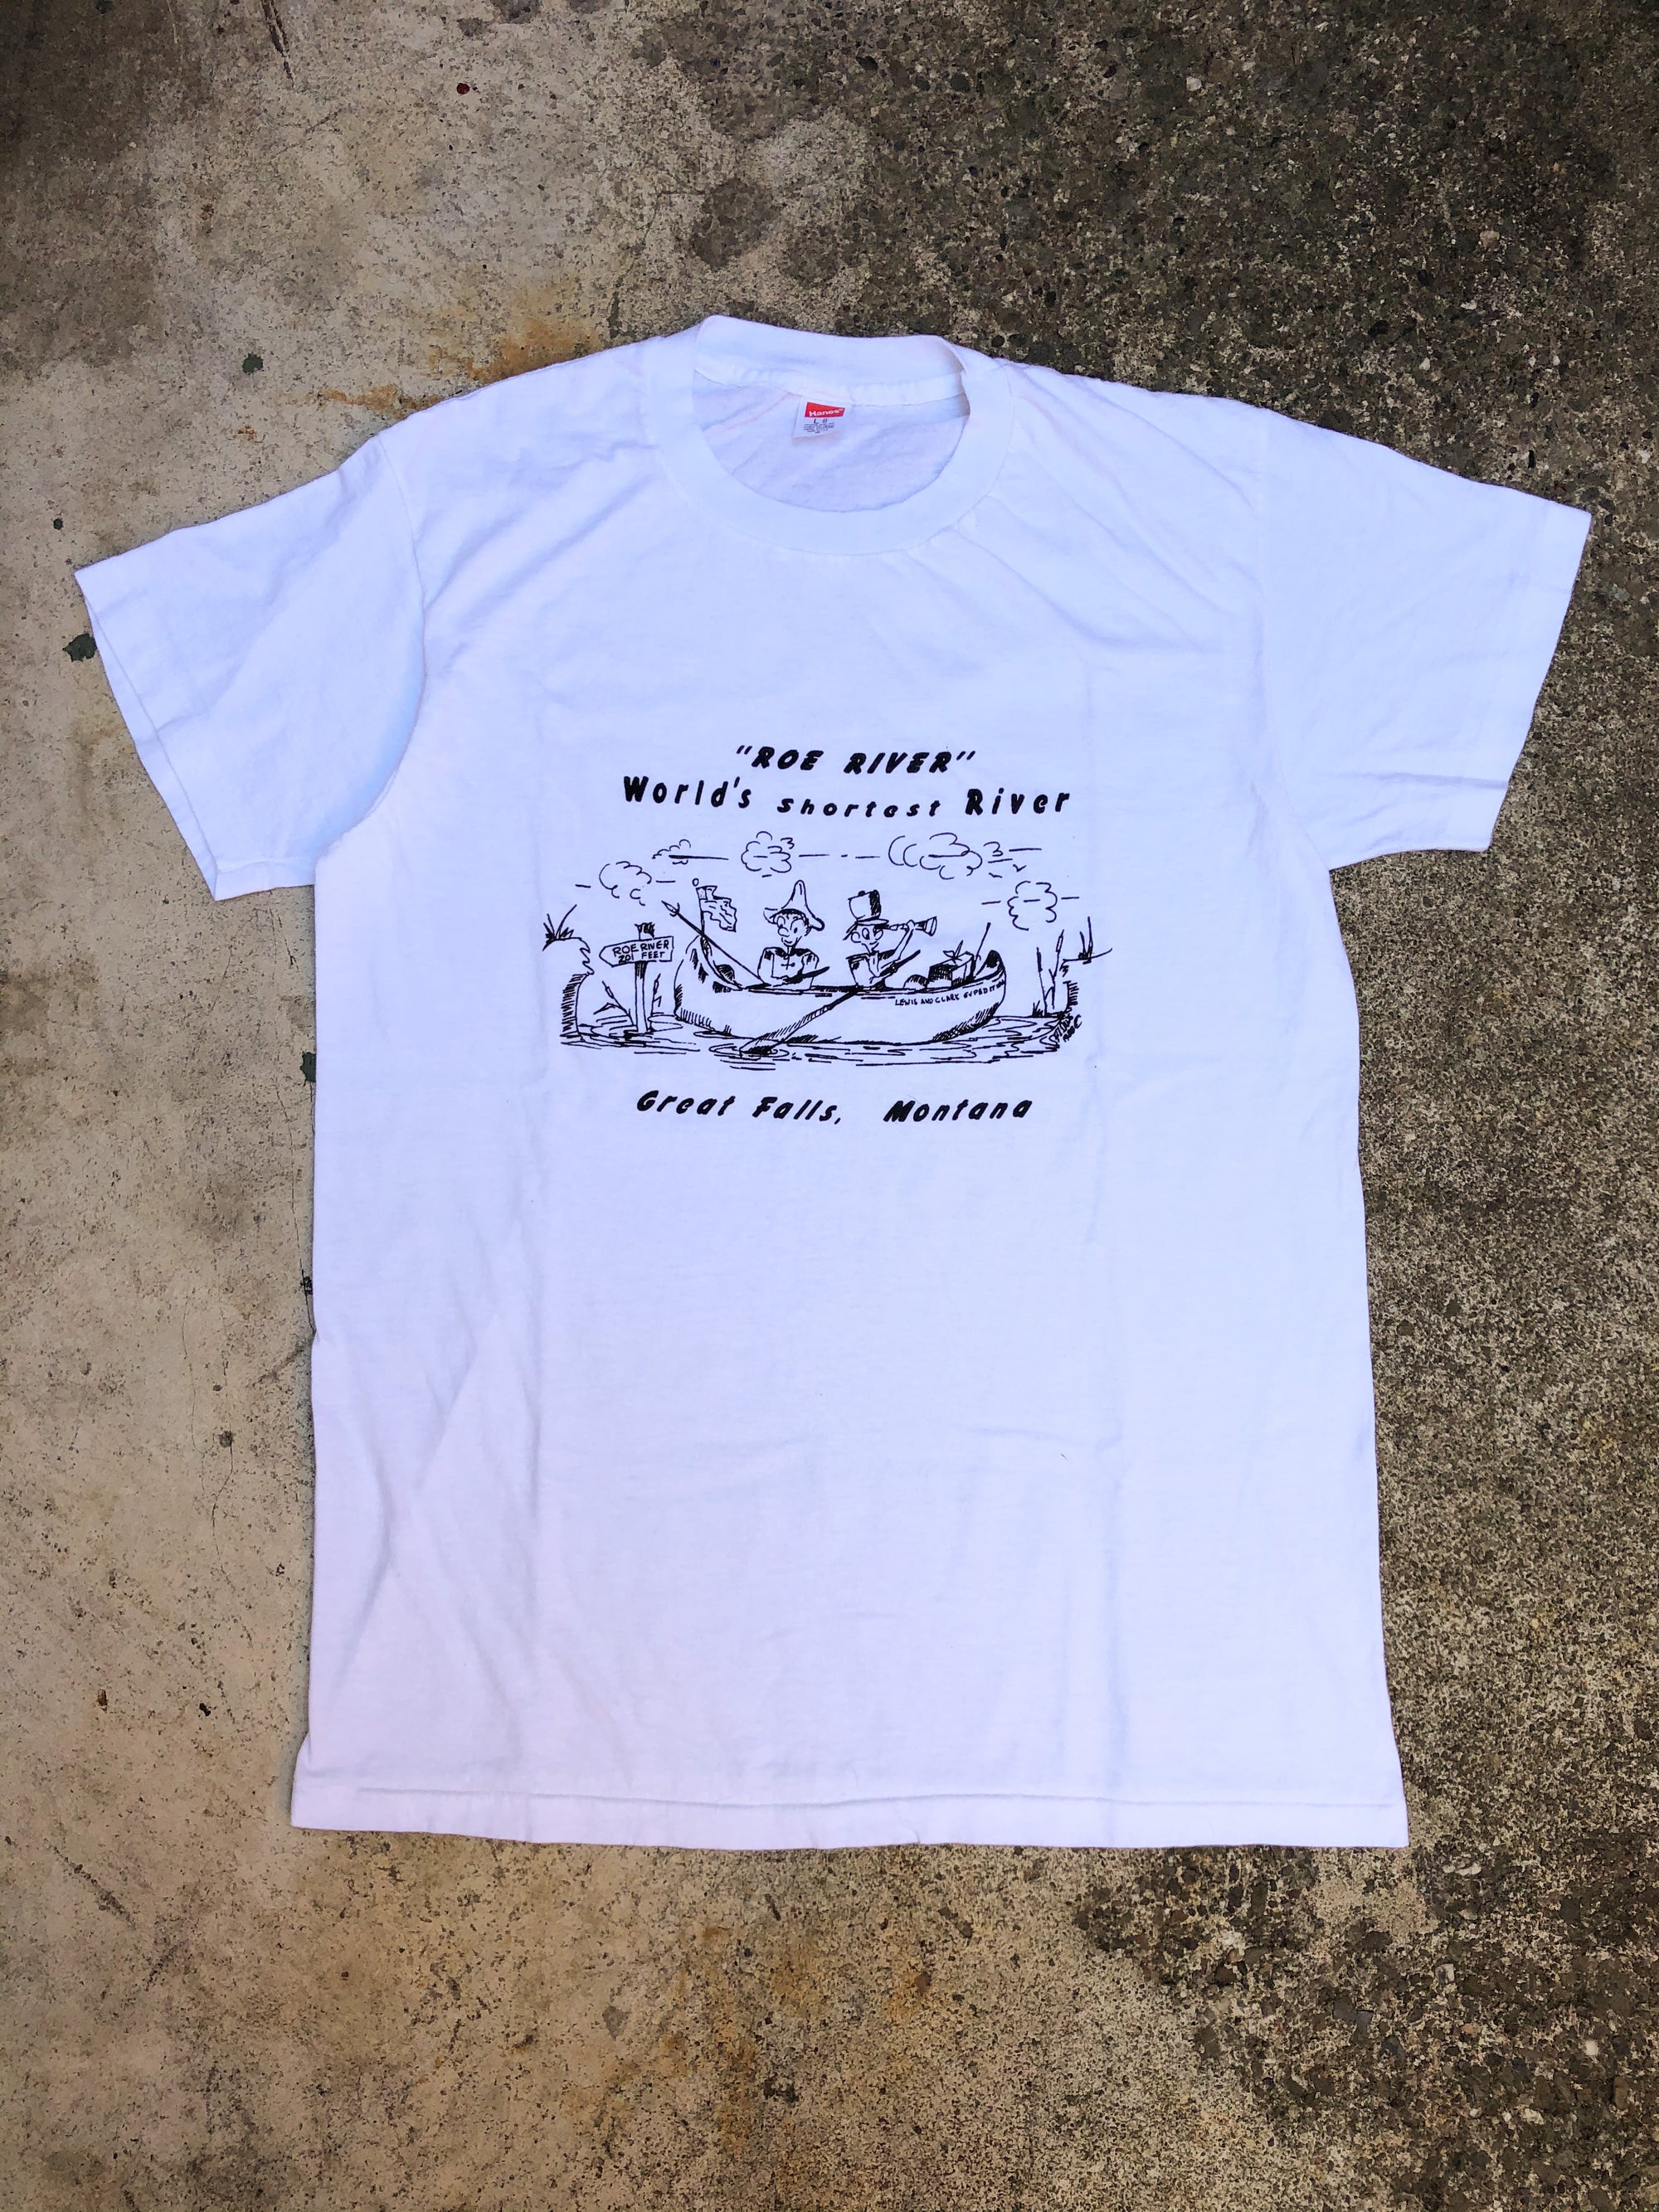 1980s Single Stitched “Roe River” Tee